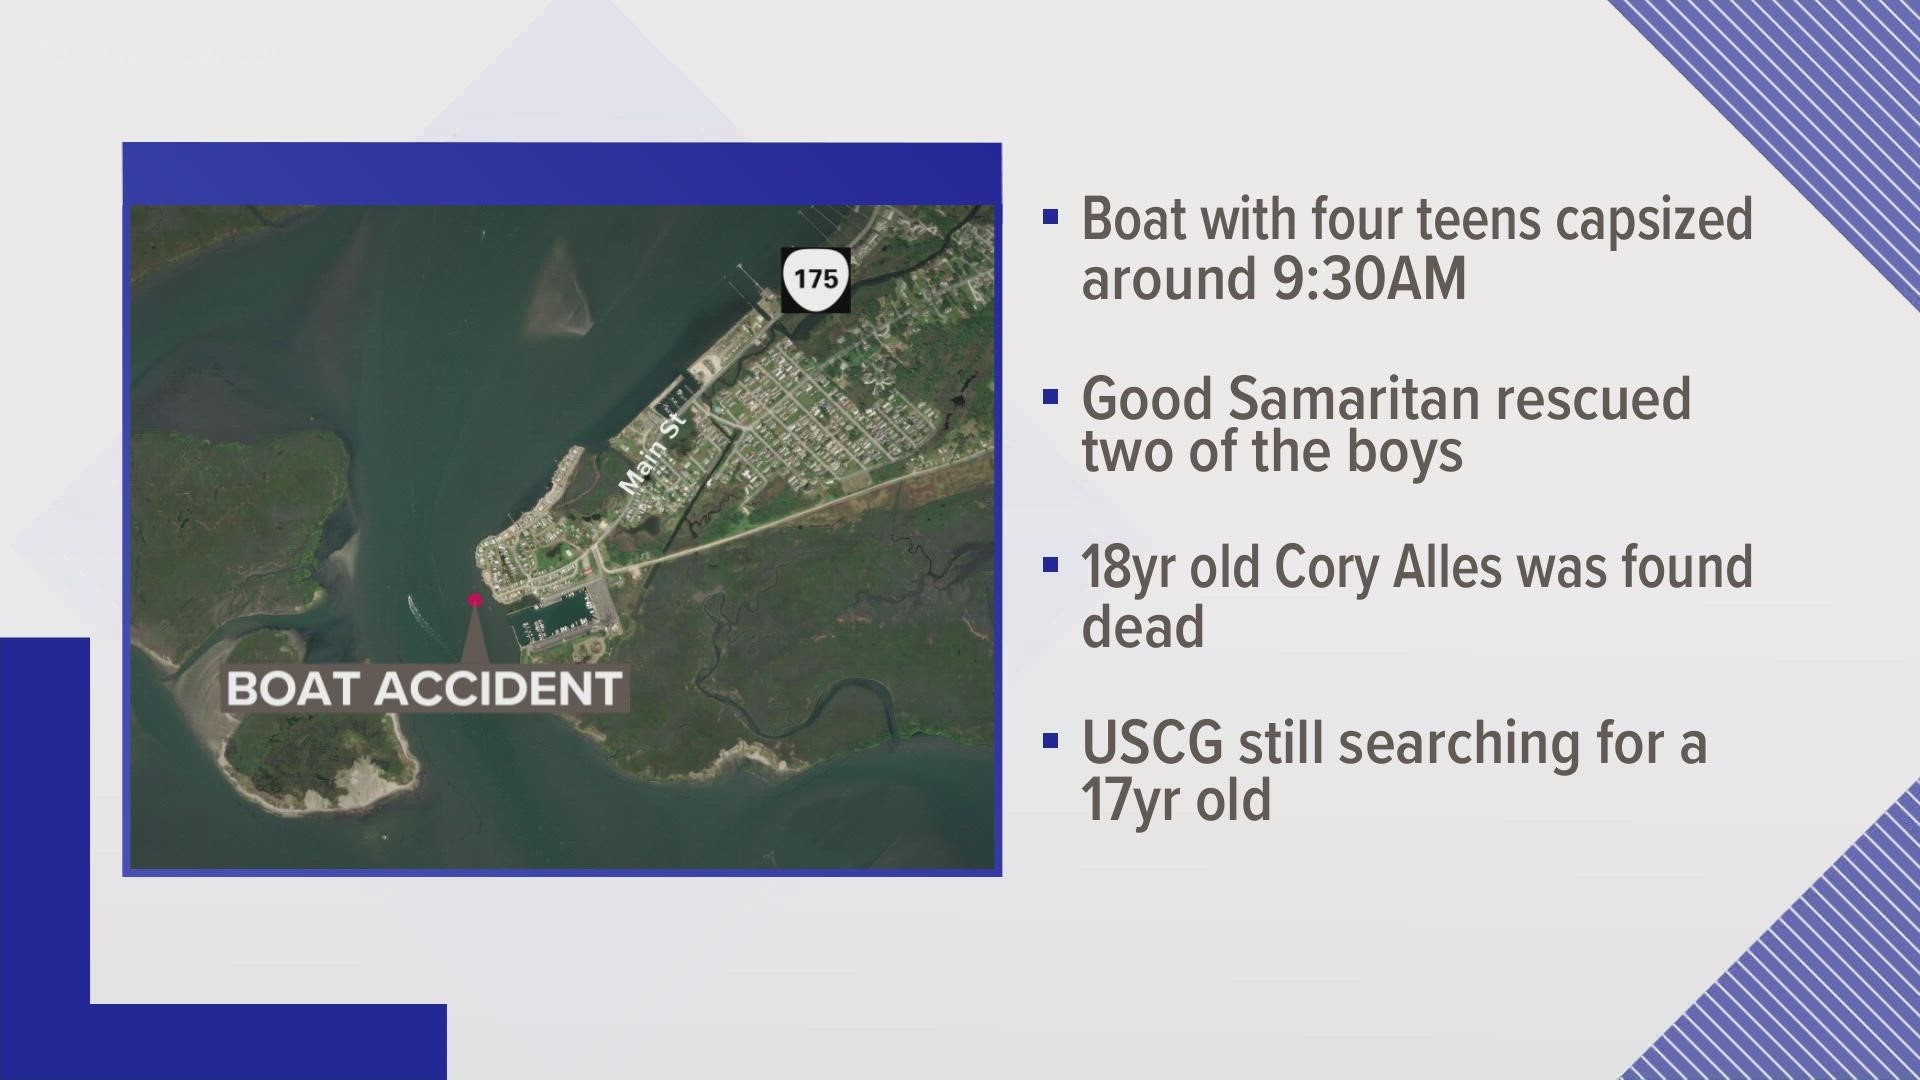 Witnesses told Virginia Marine Police that the 16 foot long boat was struck by a wave which caused it to capsize, throwing all four occupants into the water.